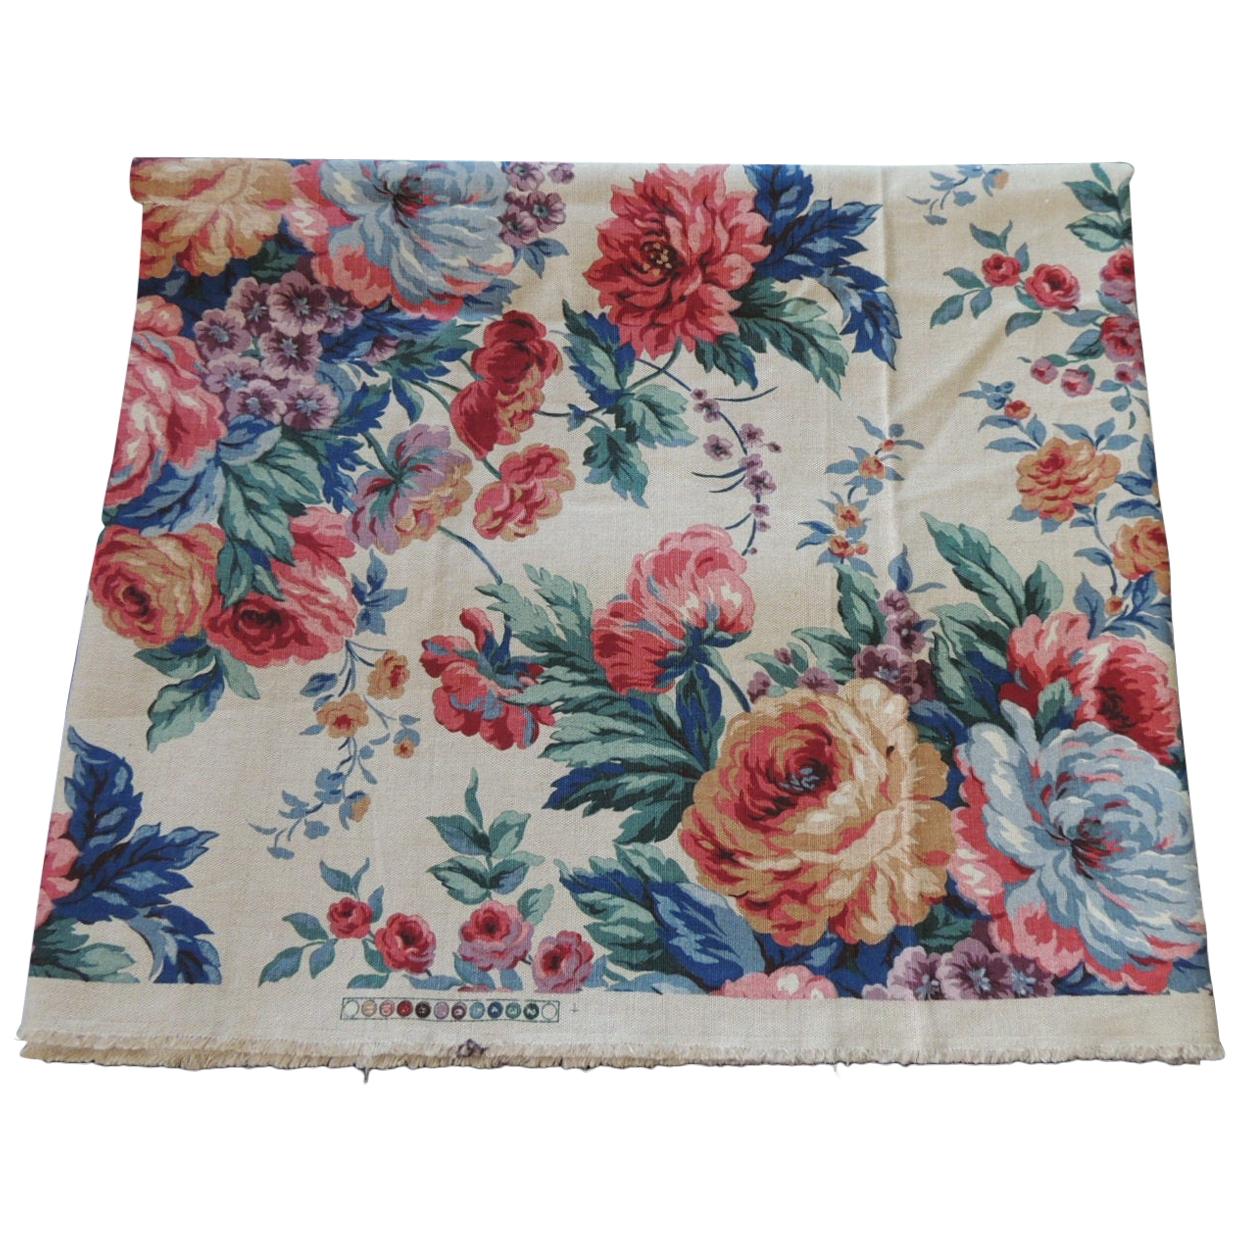 Fabric by The Yard Vintage Red and Blue Cabbage Roses Floral Textile